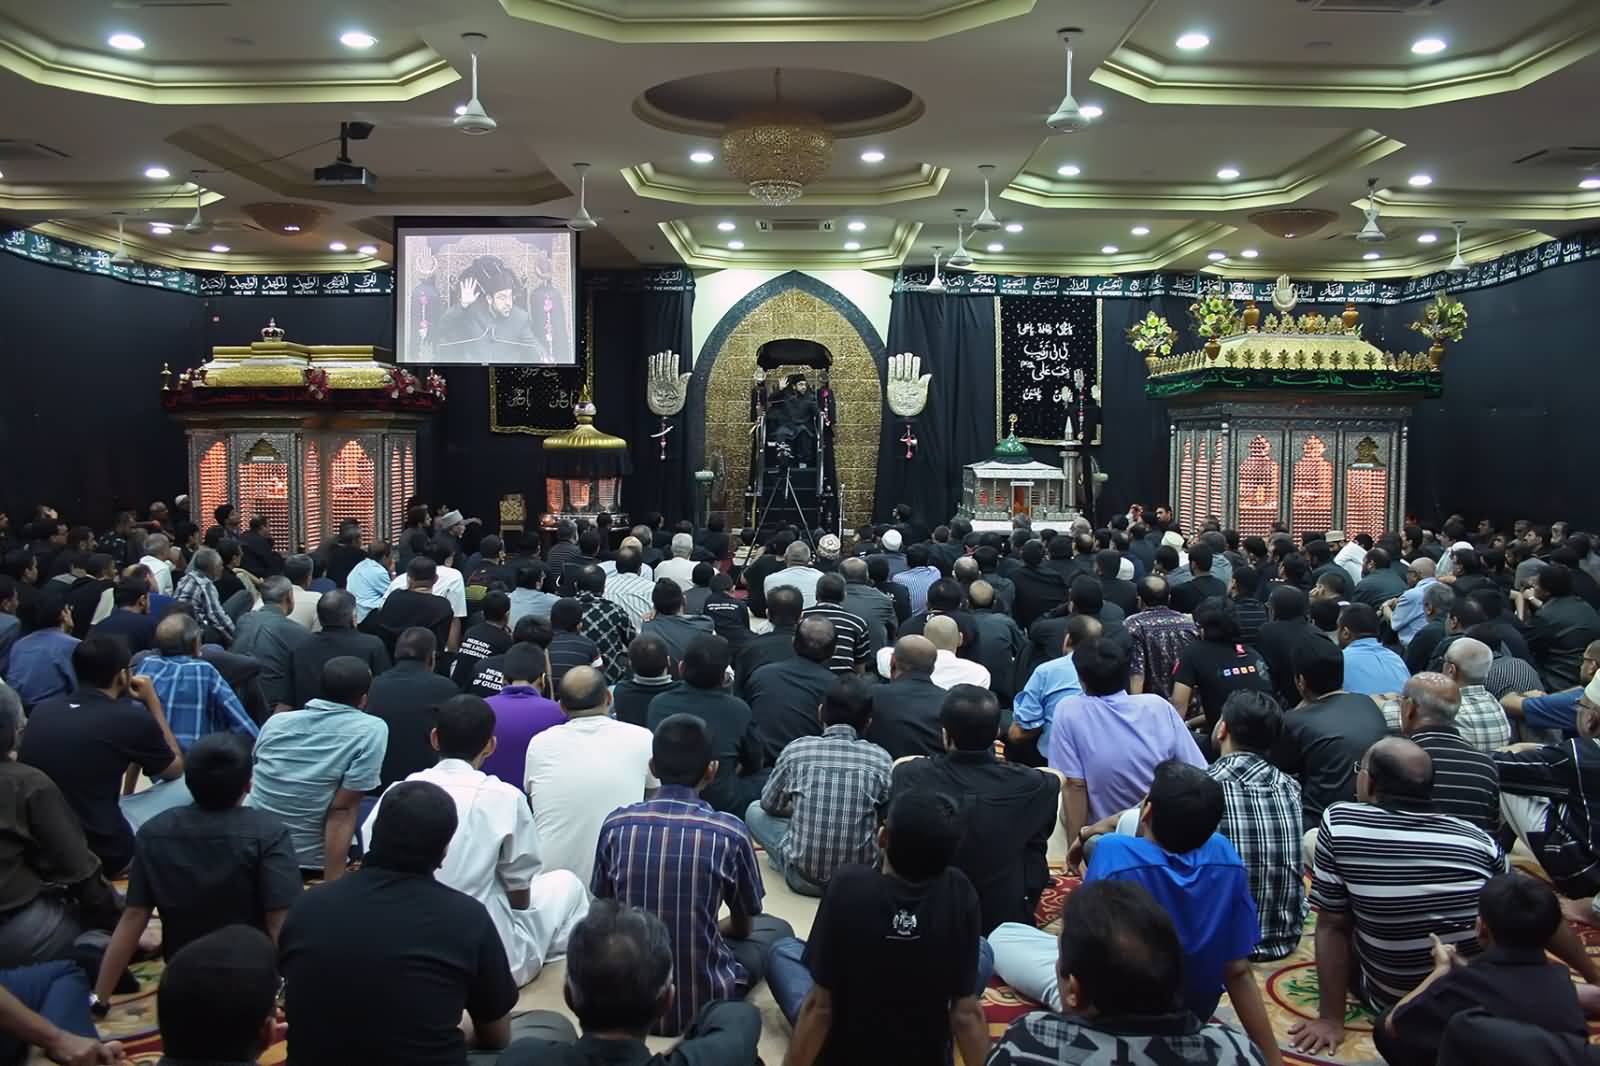 Muharram Mourning Celebration At A Mosque